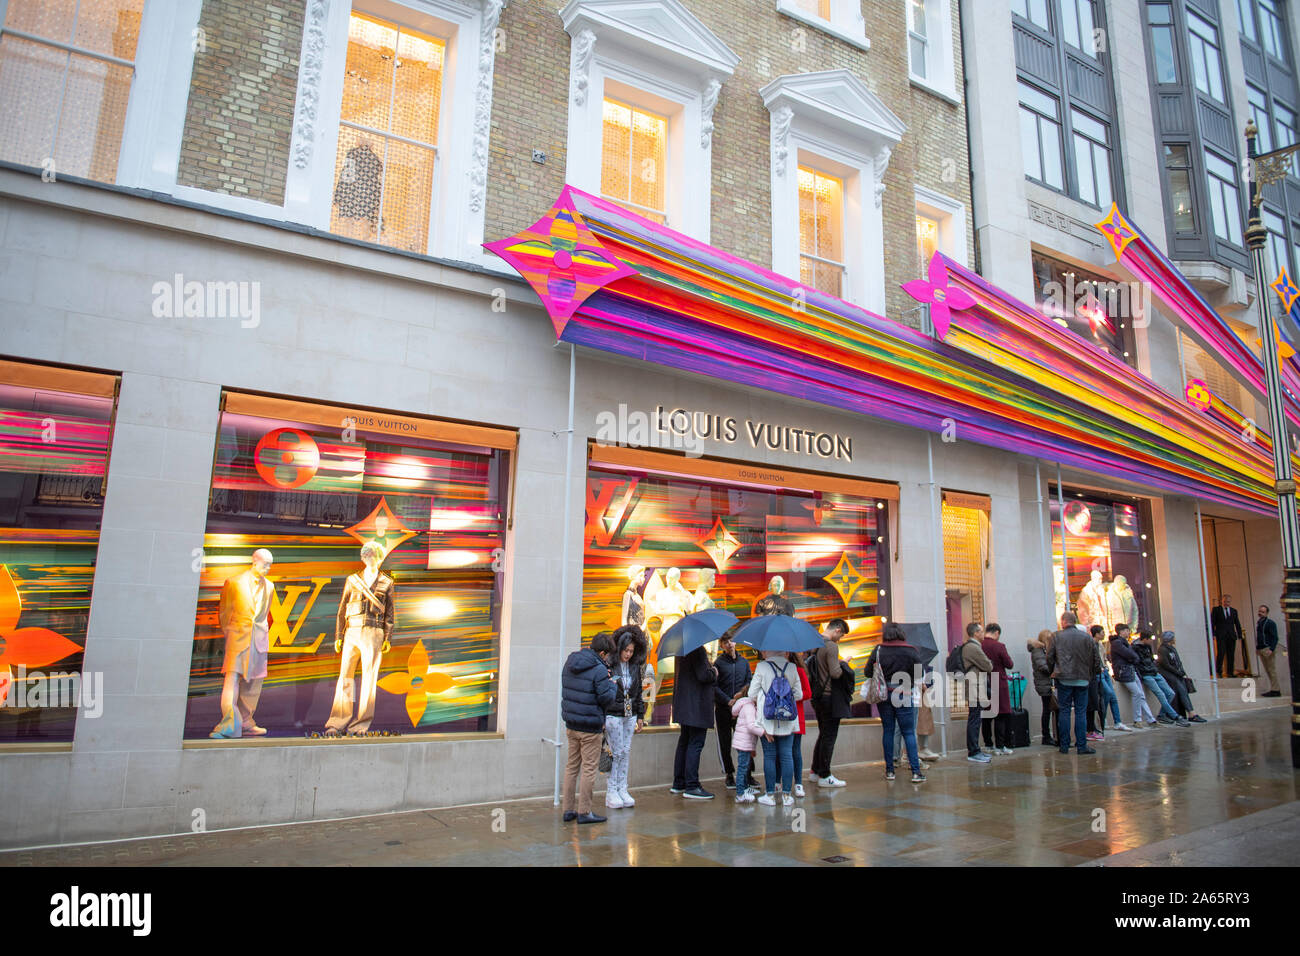 Louis vuitton london store hi-res stock photography and images - Alamy